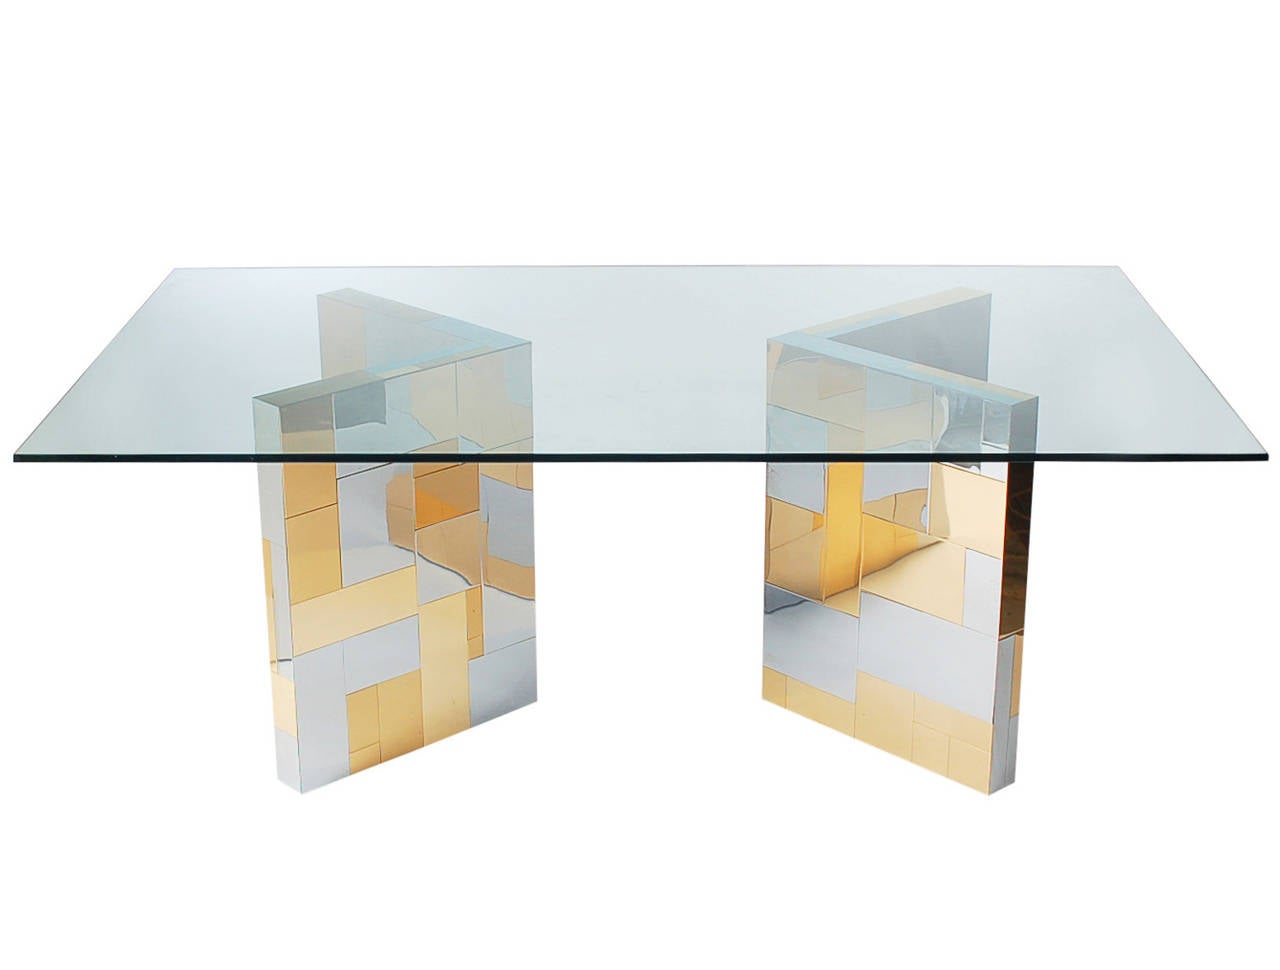 An exceptional patchwork designed dining table by Paul Evans. It consists of two L-shaped pedestals with nickel and brass plated panels, and a thick clear glass top. Pedestals can be configured in many different ways.